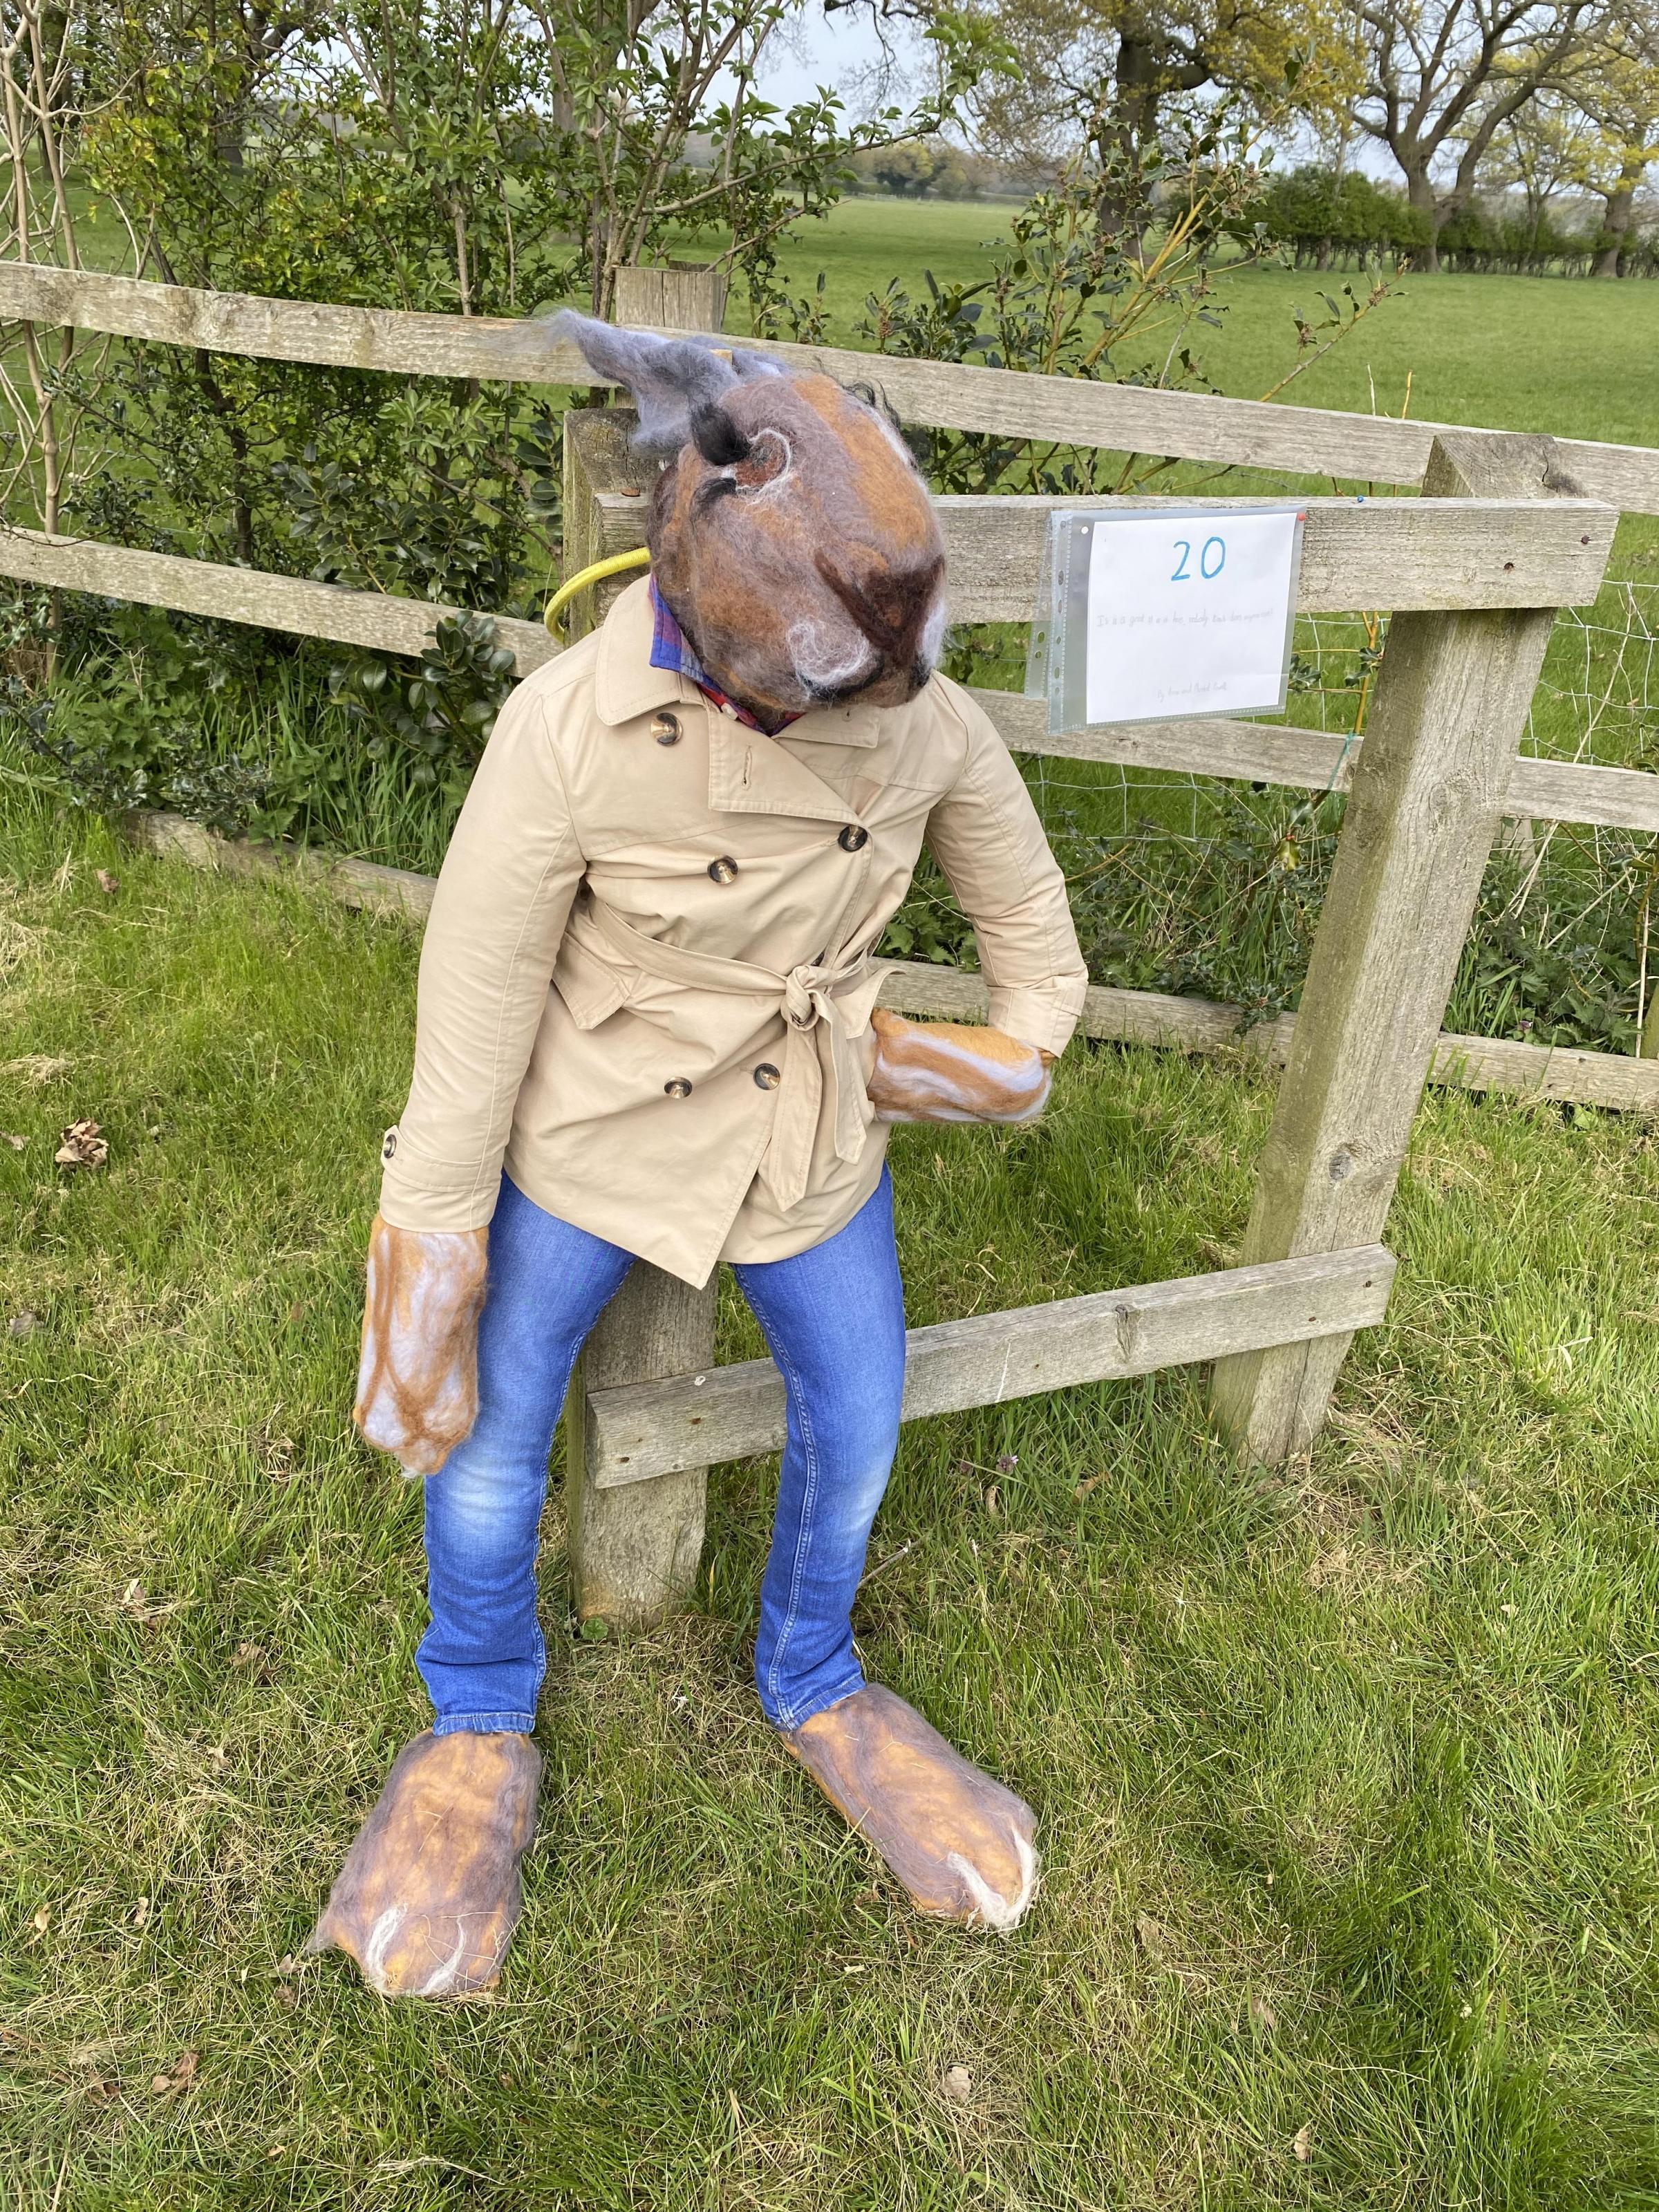 A scarecrow festival was held in Dodleston.